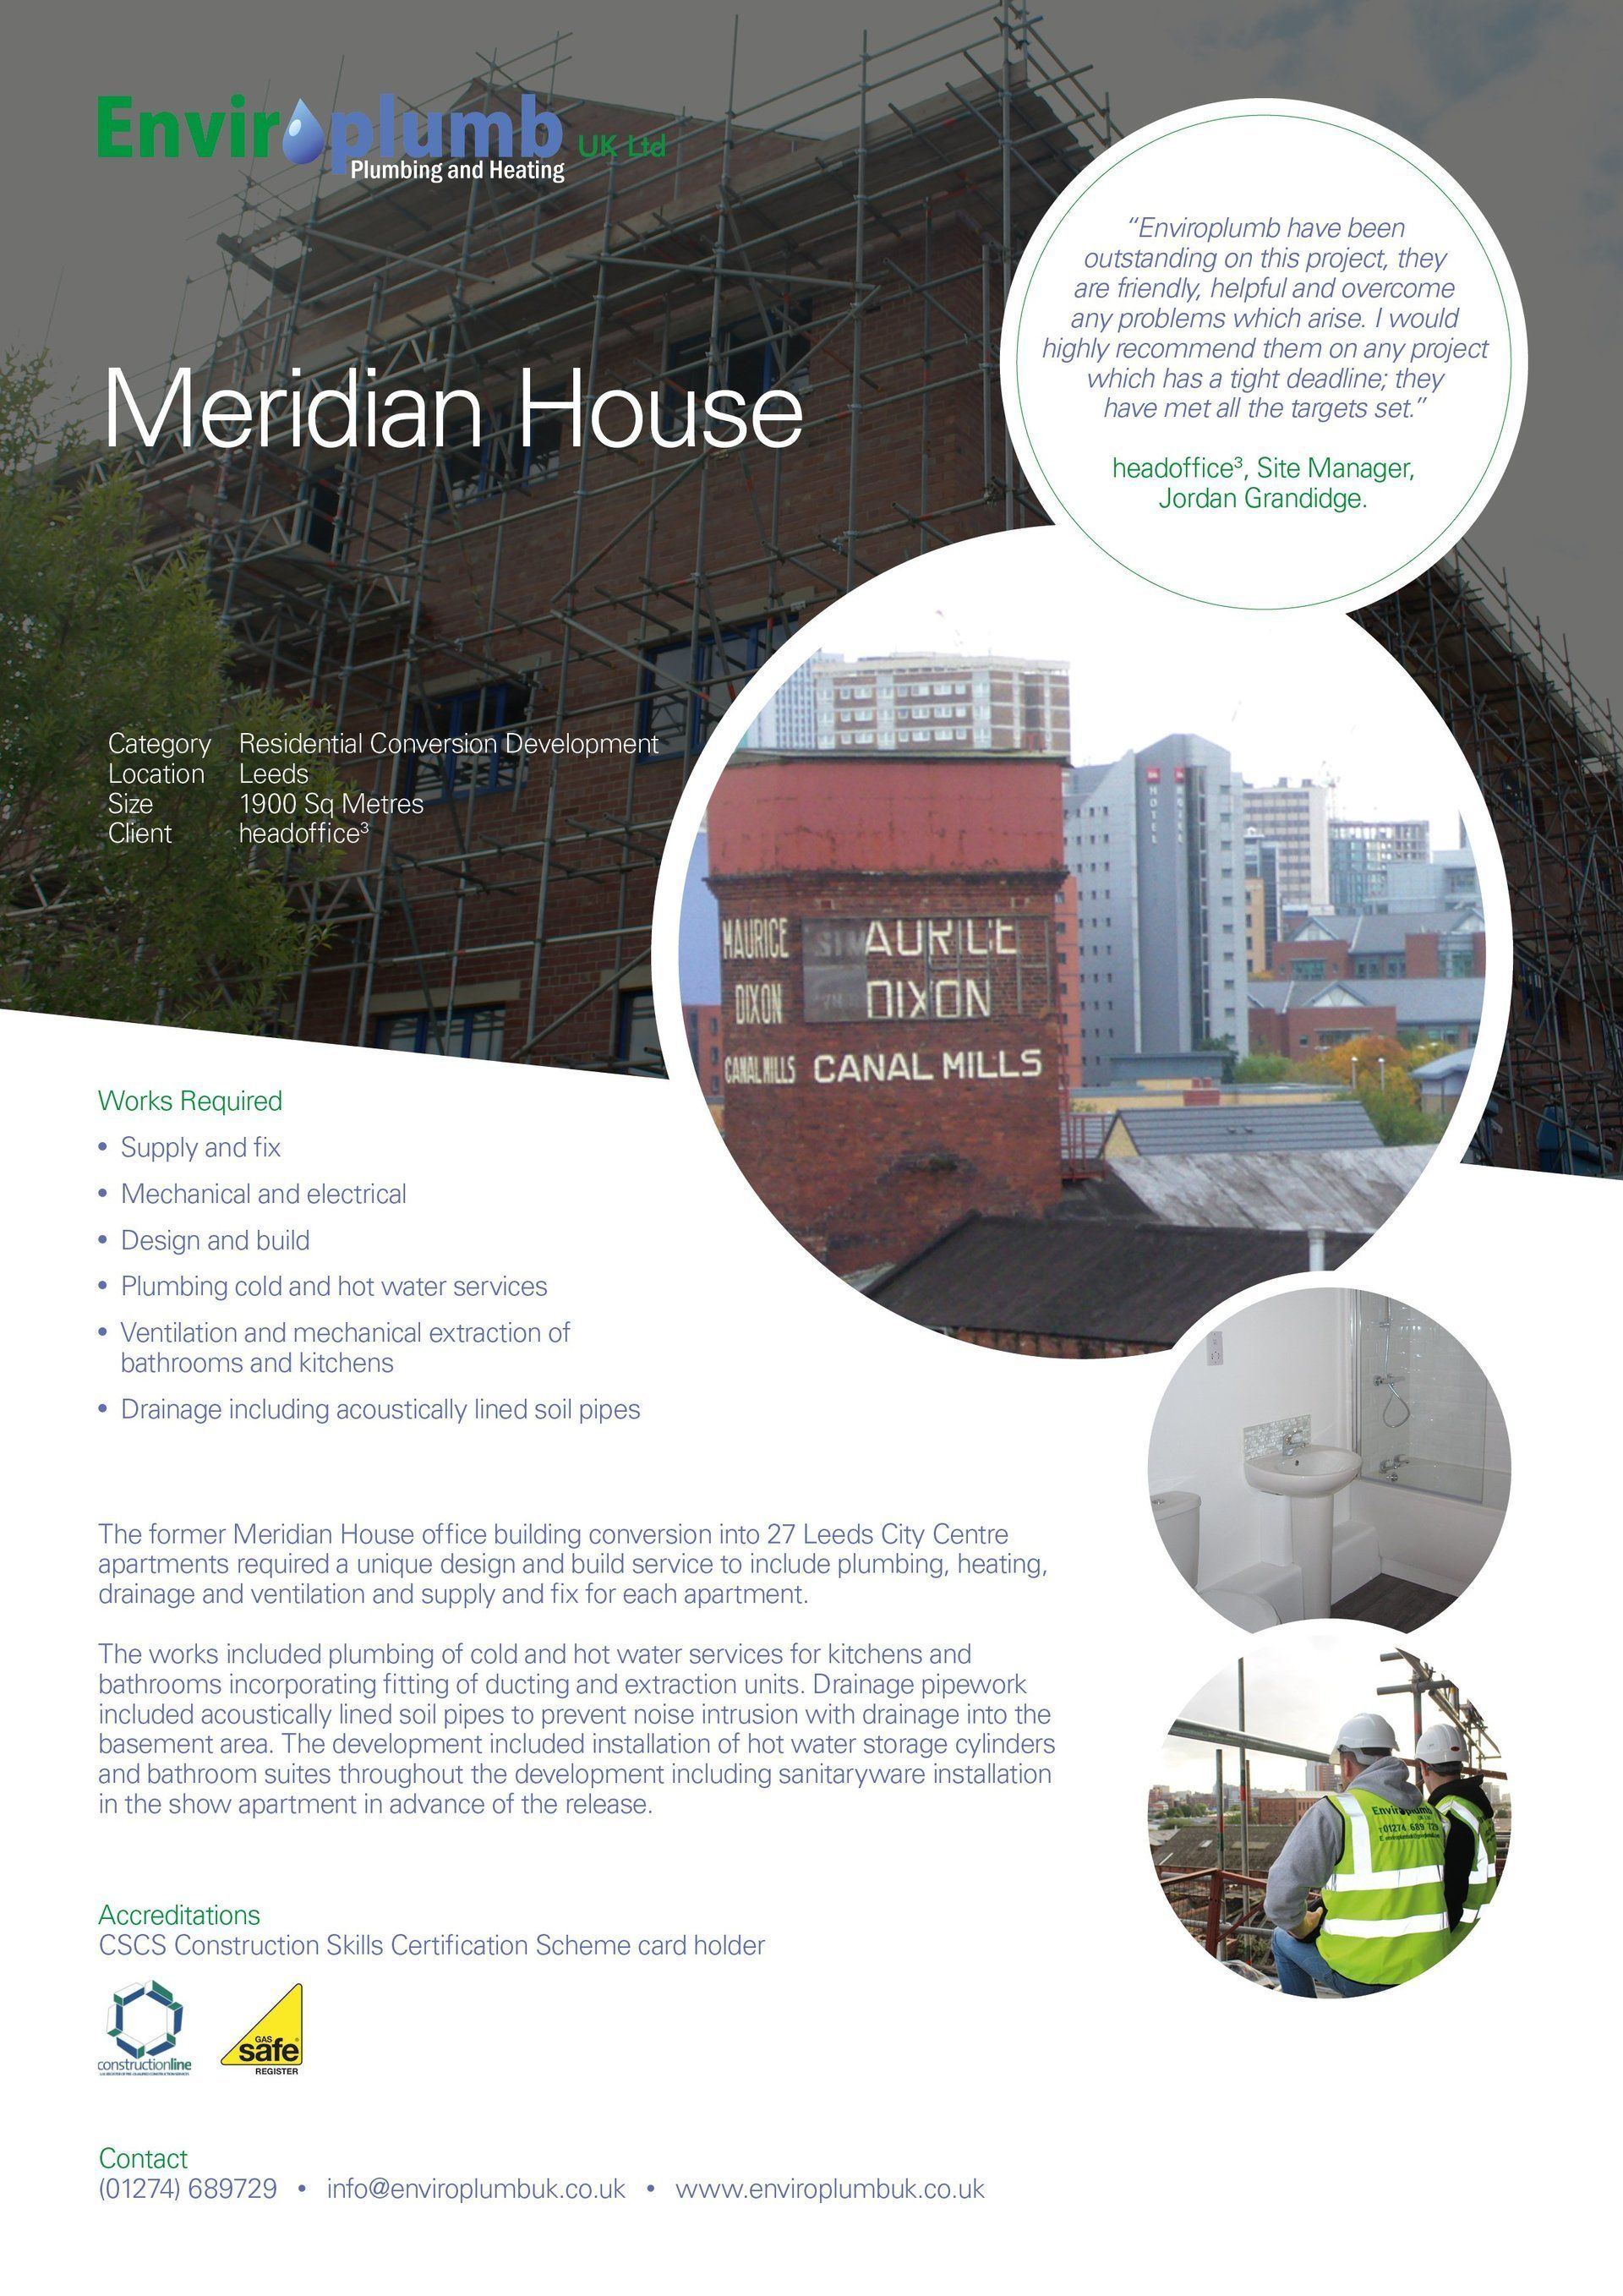 Meridian house apartments